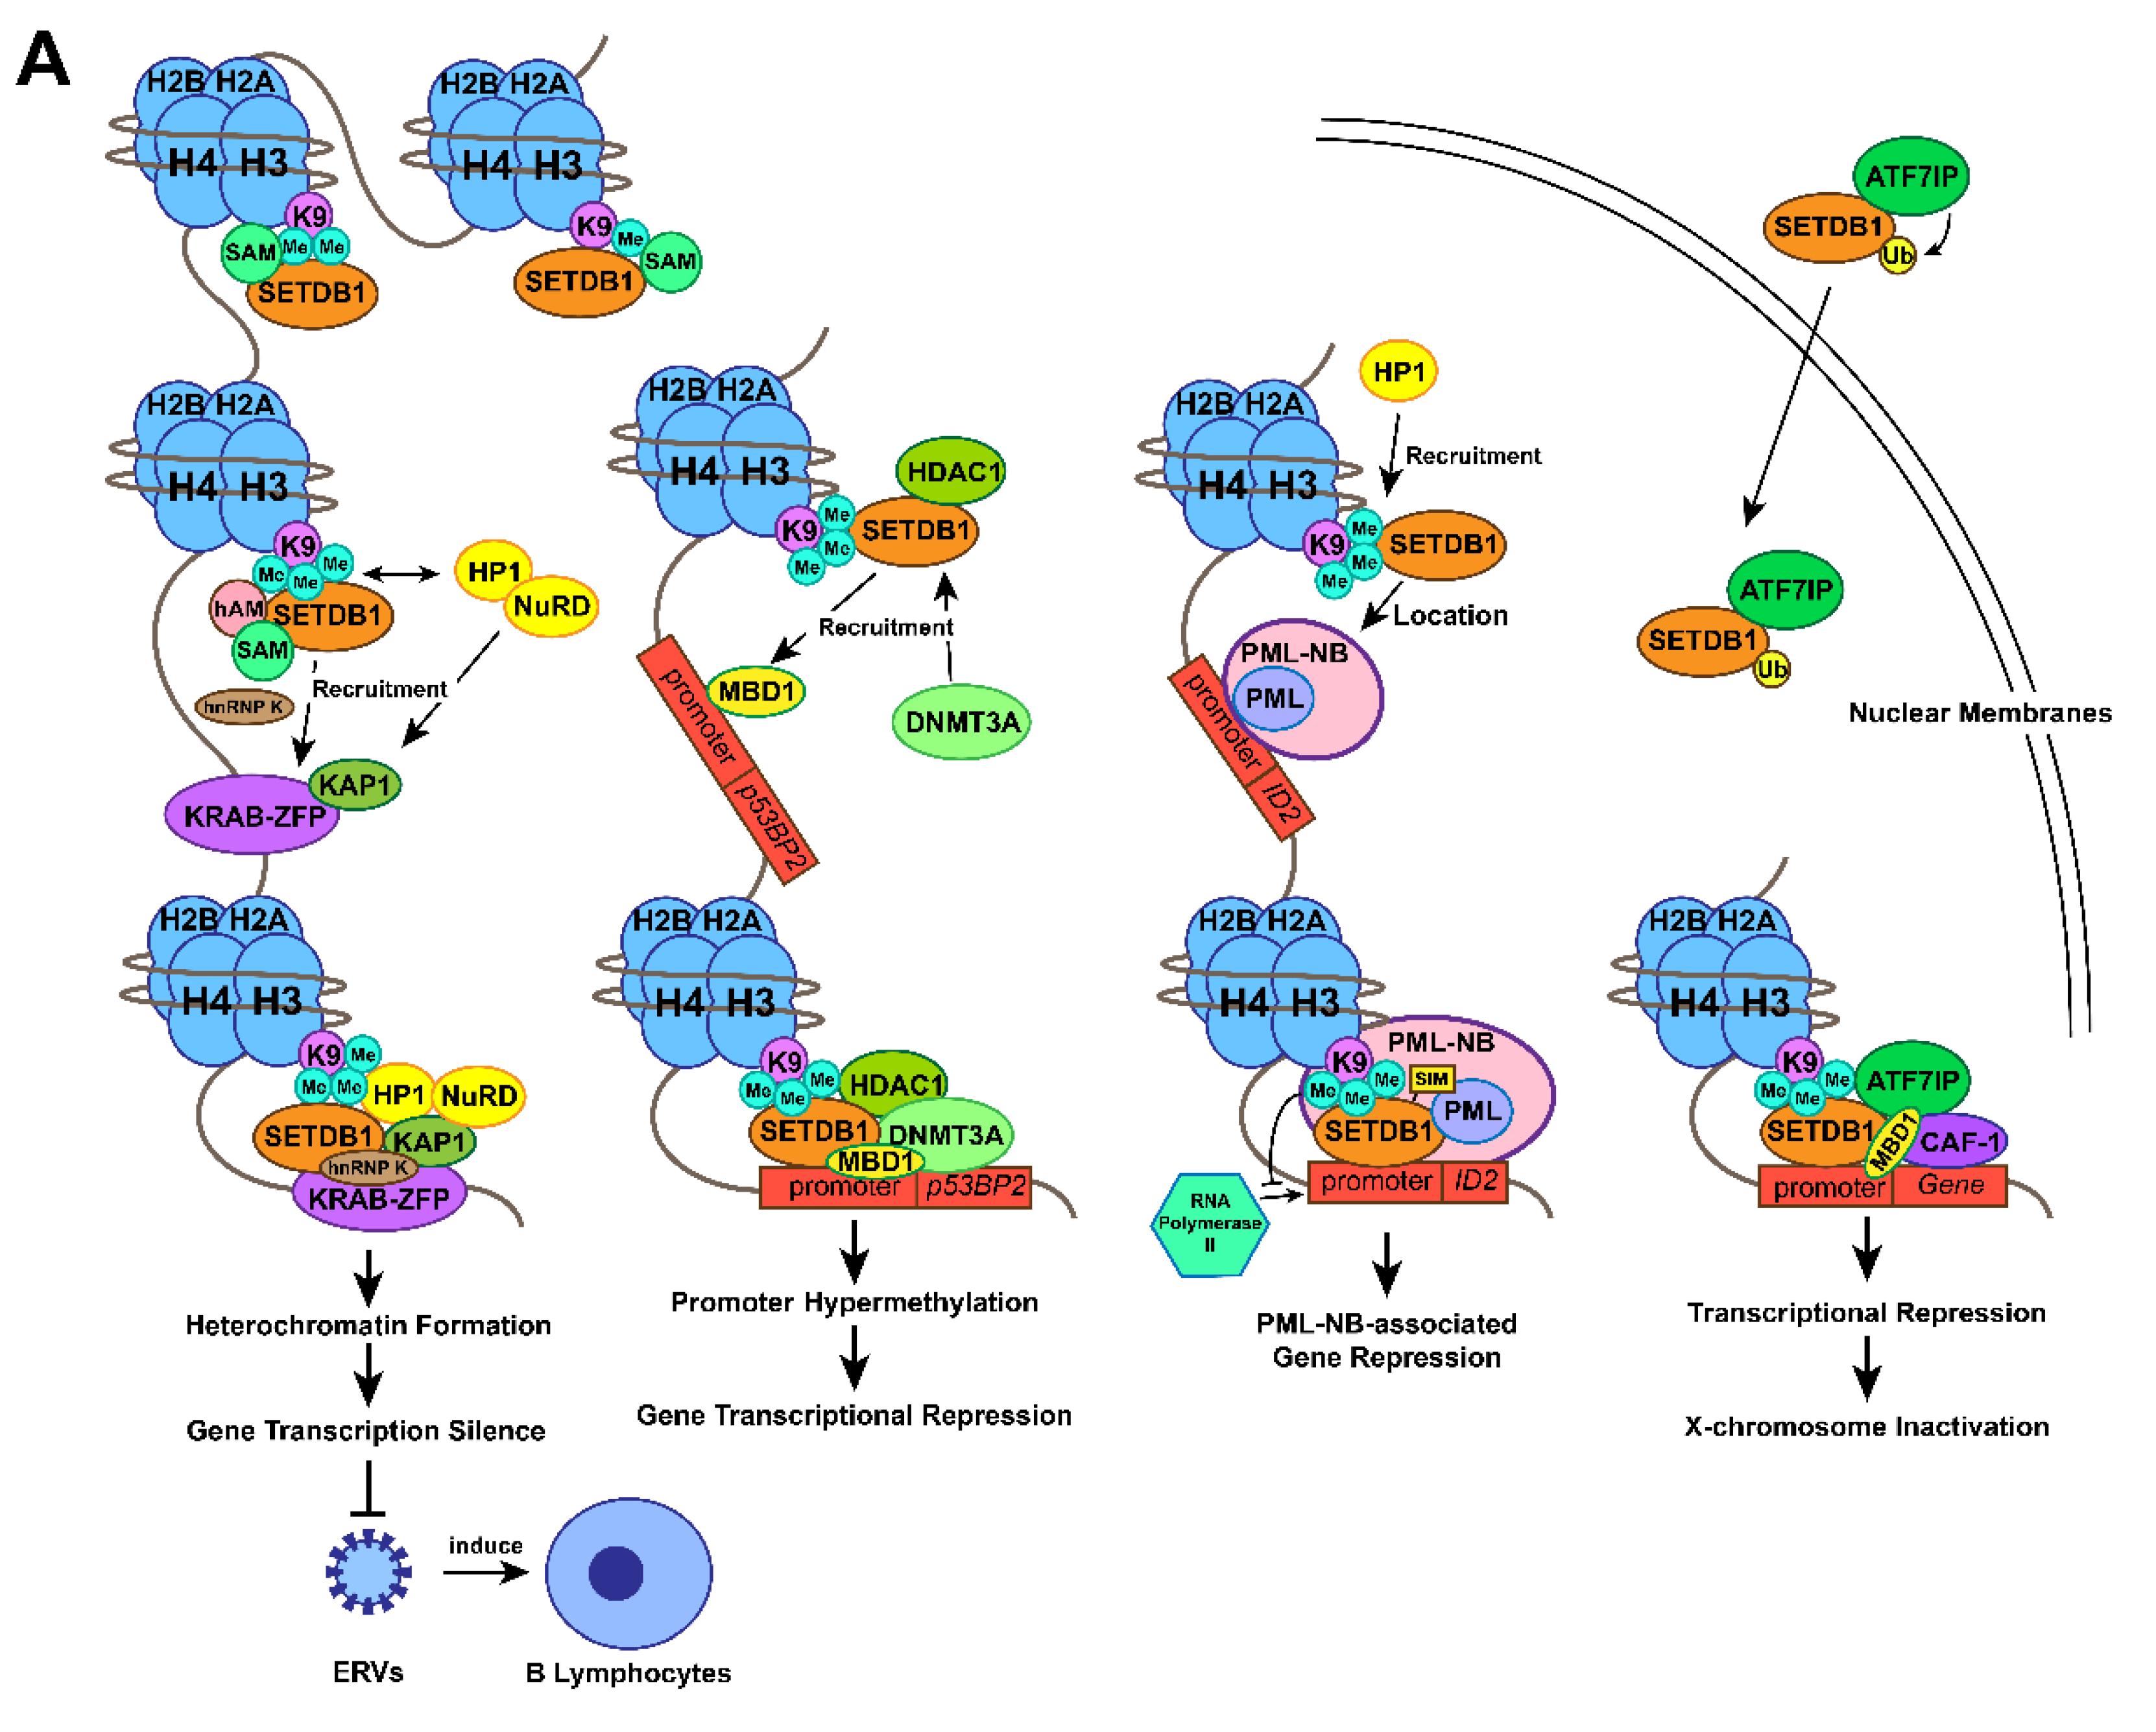 IJMS | Free Full-Text | The Updating of Biological Functions of  Methyltransferase SETDB1 and Its Relevance in Lung Cancer and Mesothelioma  | HTML